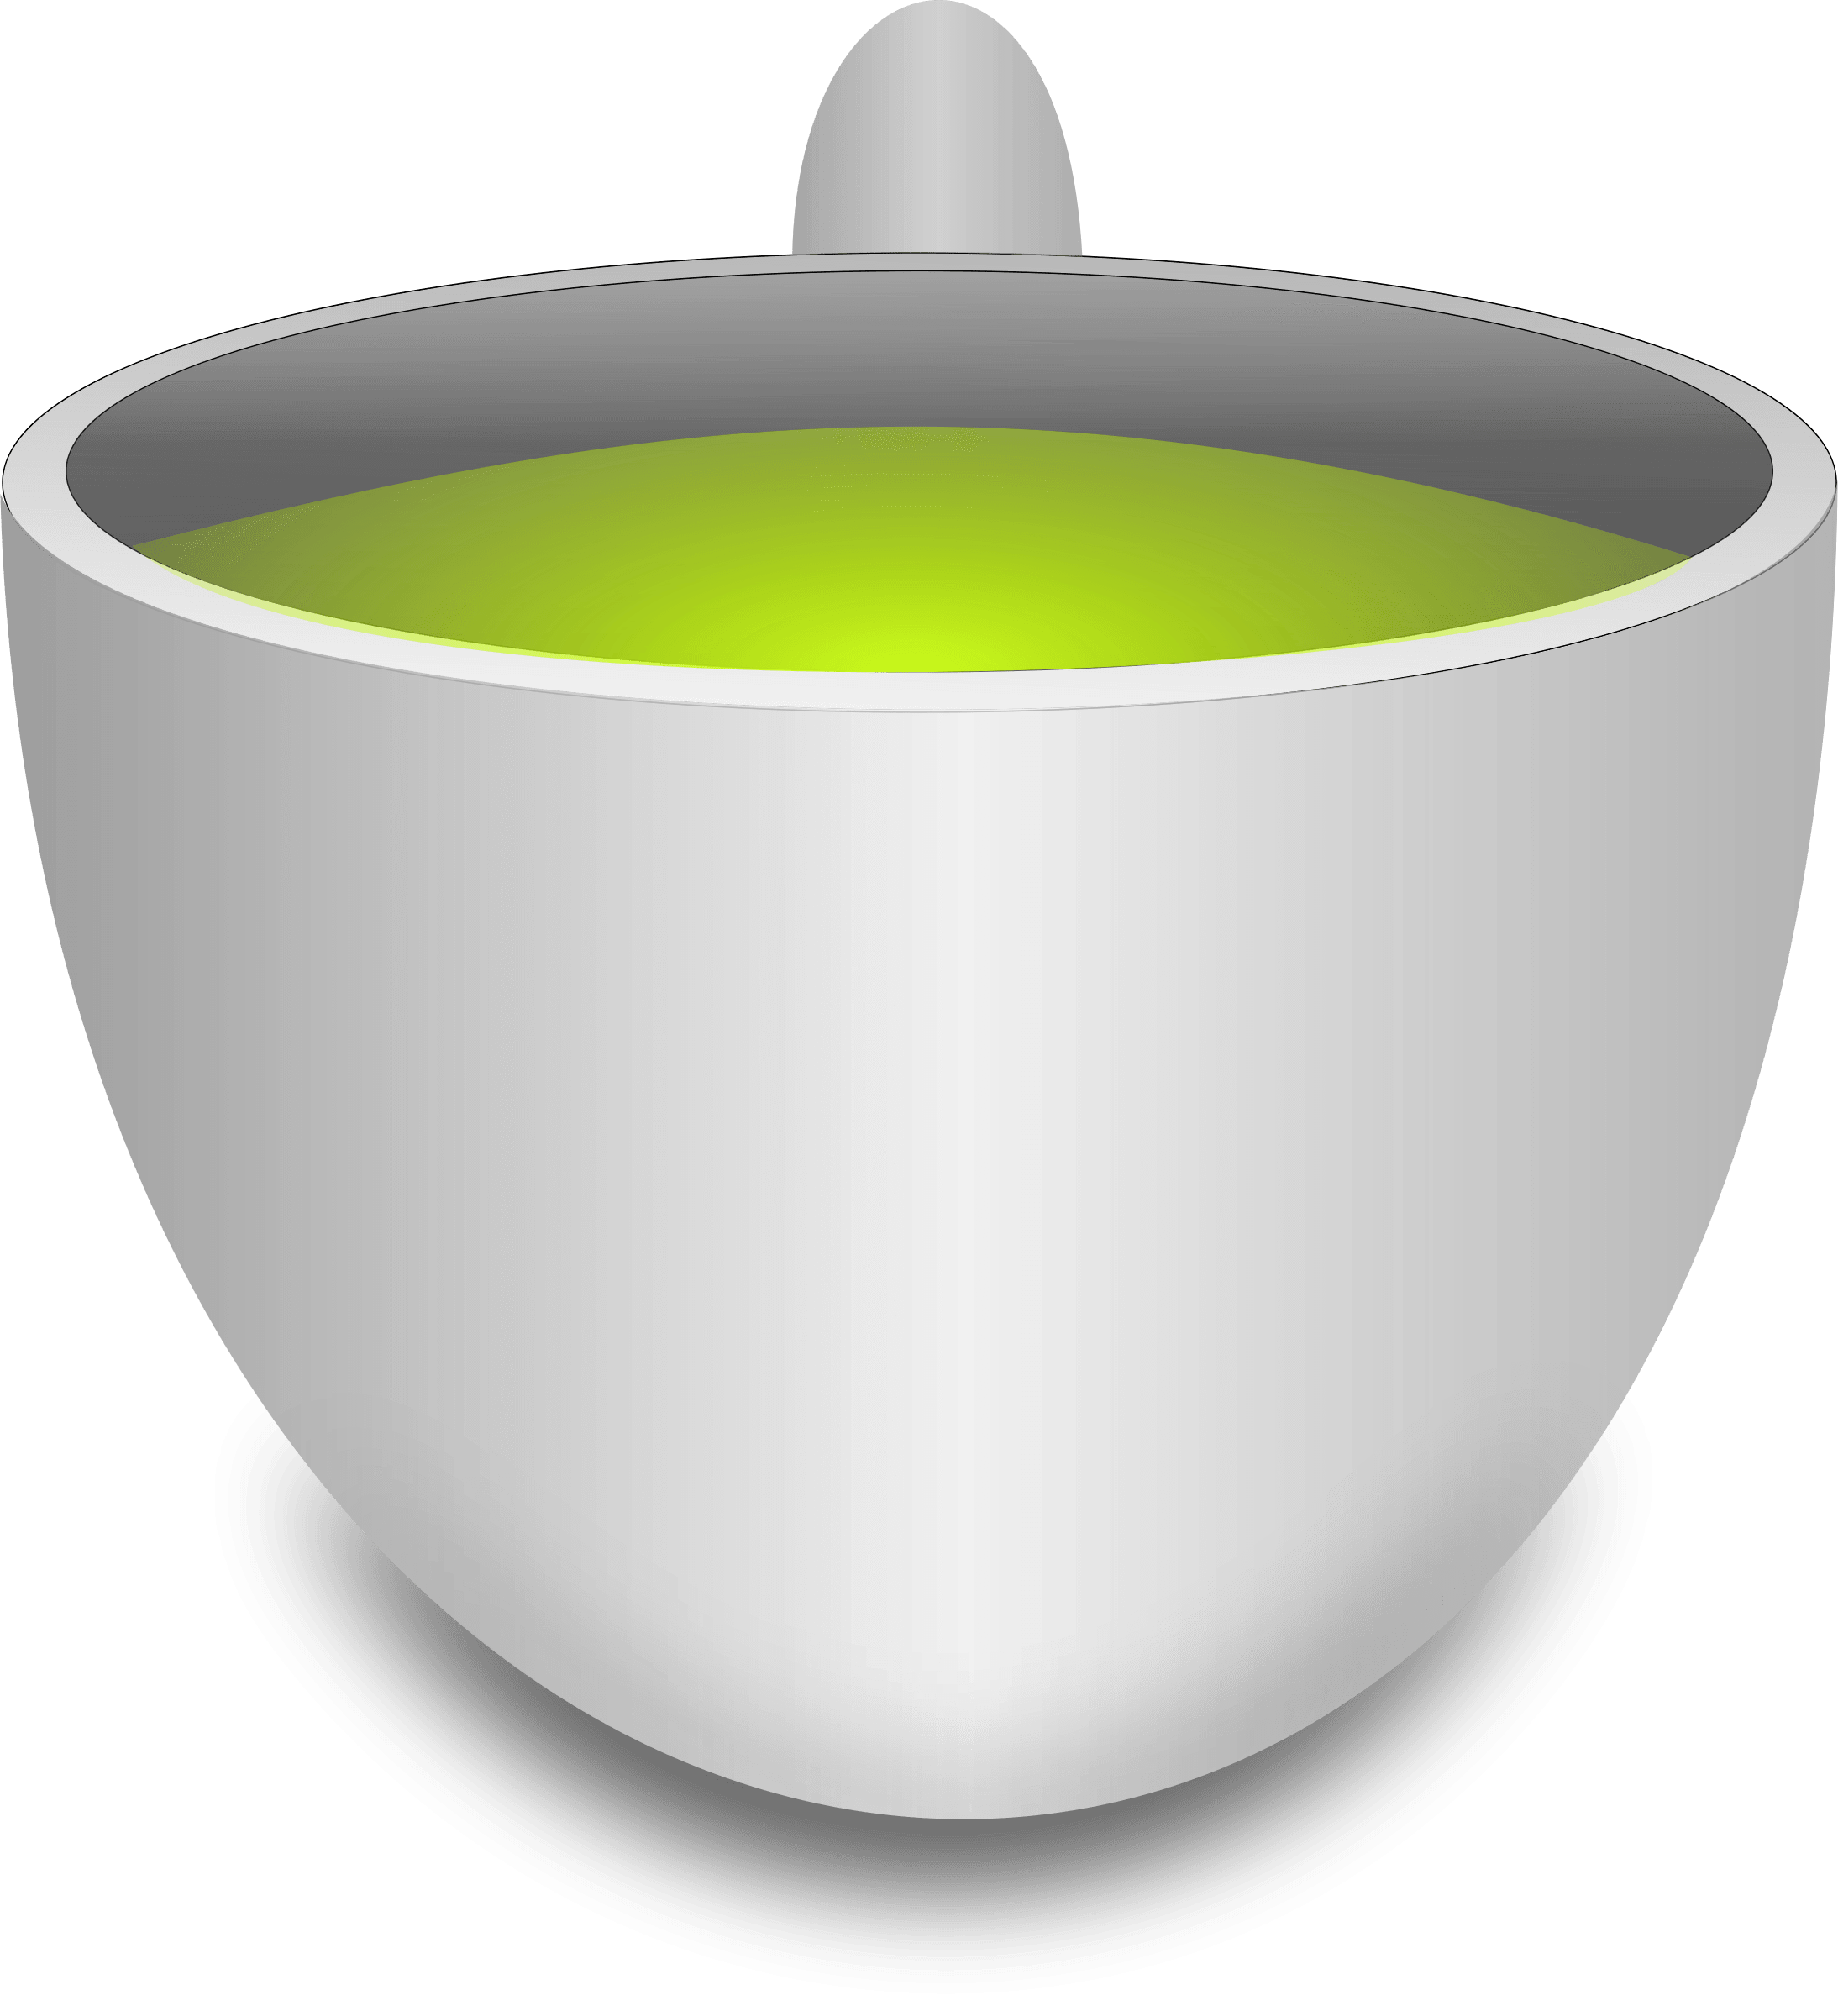 Green Tea Cup Png Image PNG Image